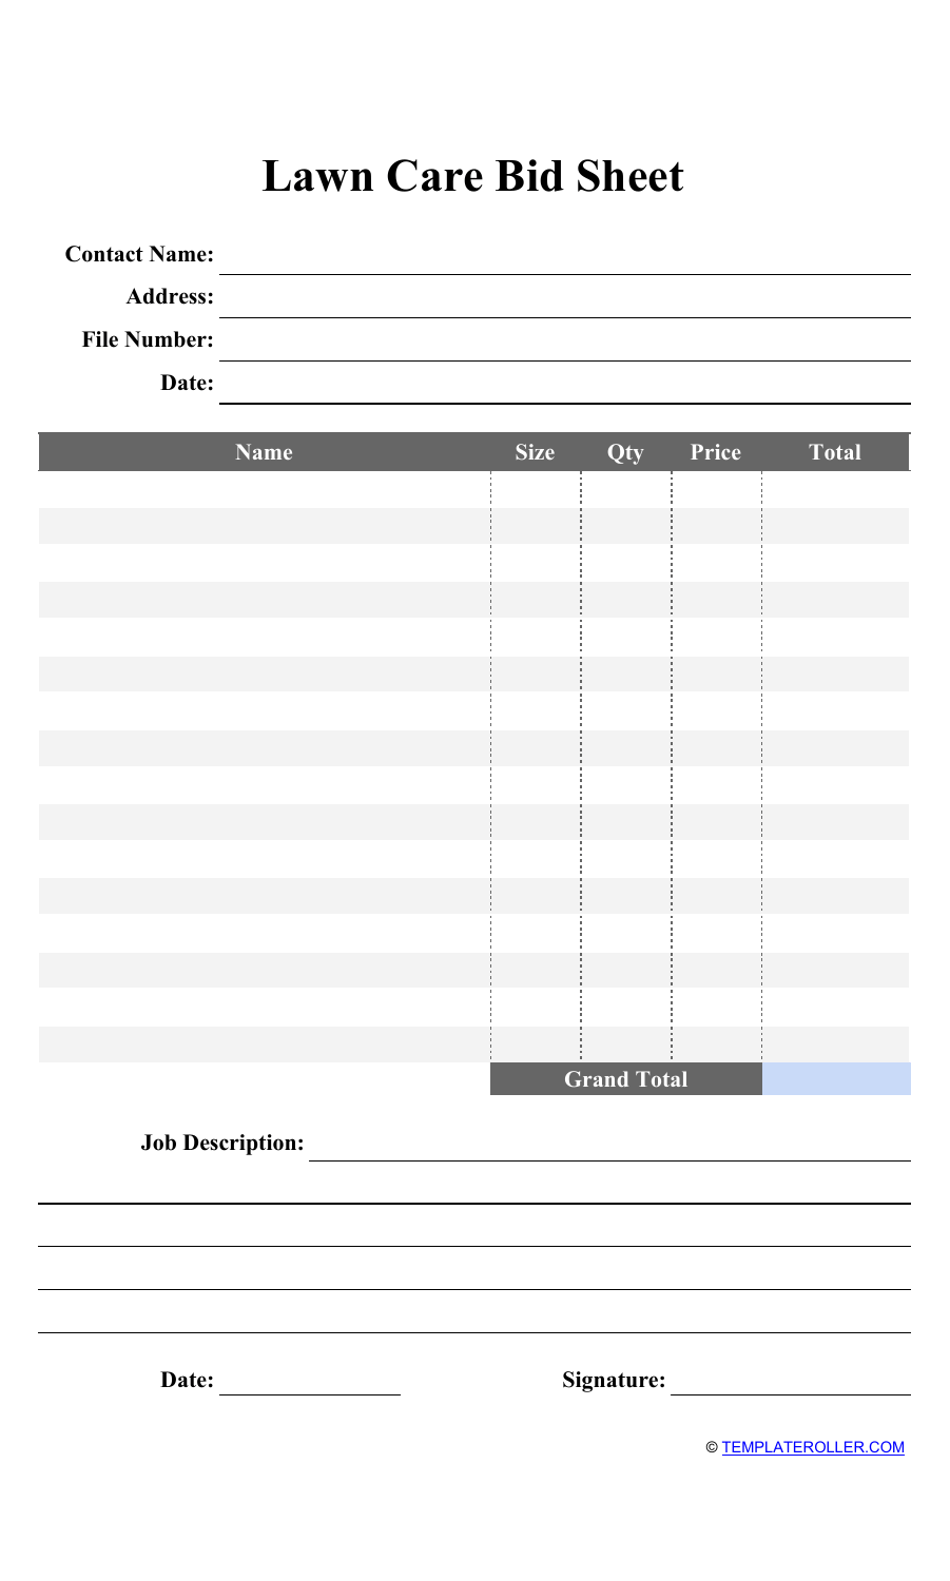 Lawn Care Bid Sheet Template Fill Out, Sign Online and Download PDF